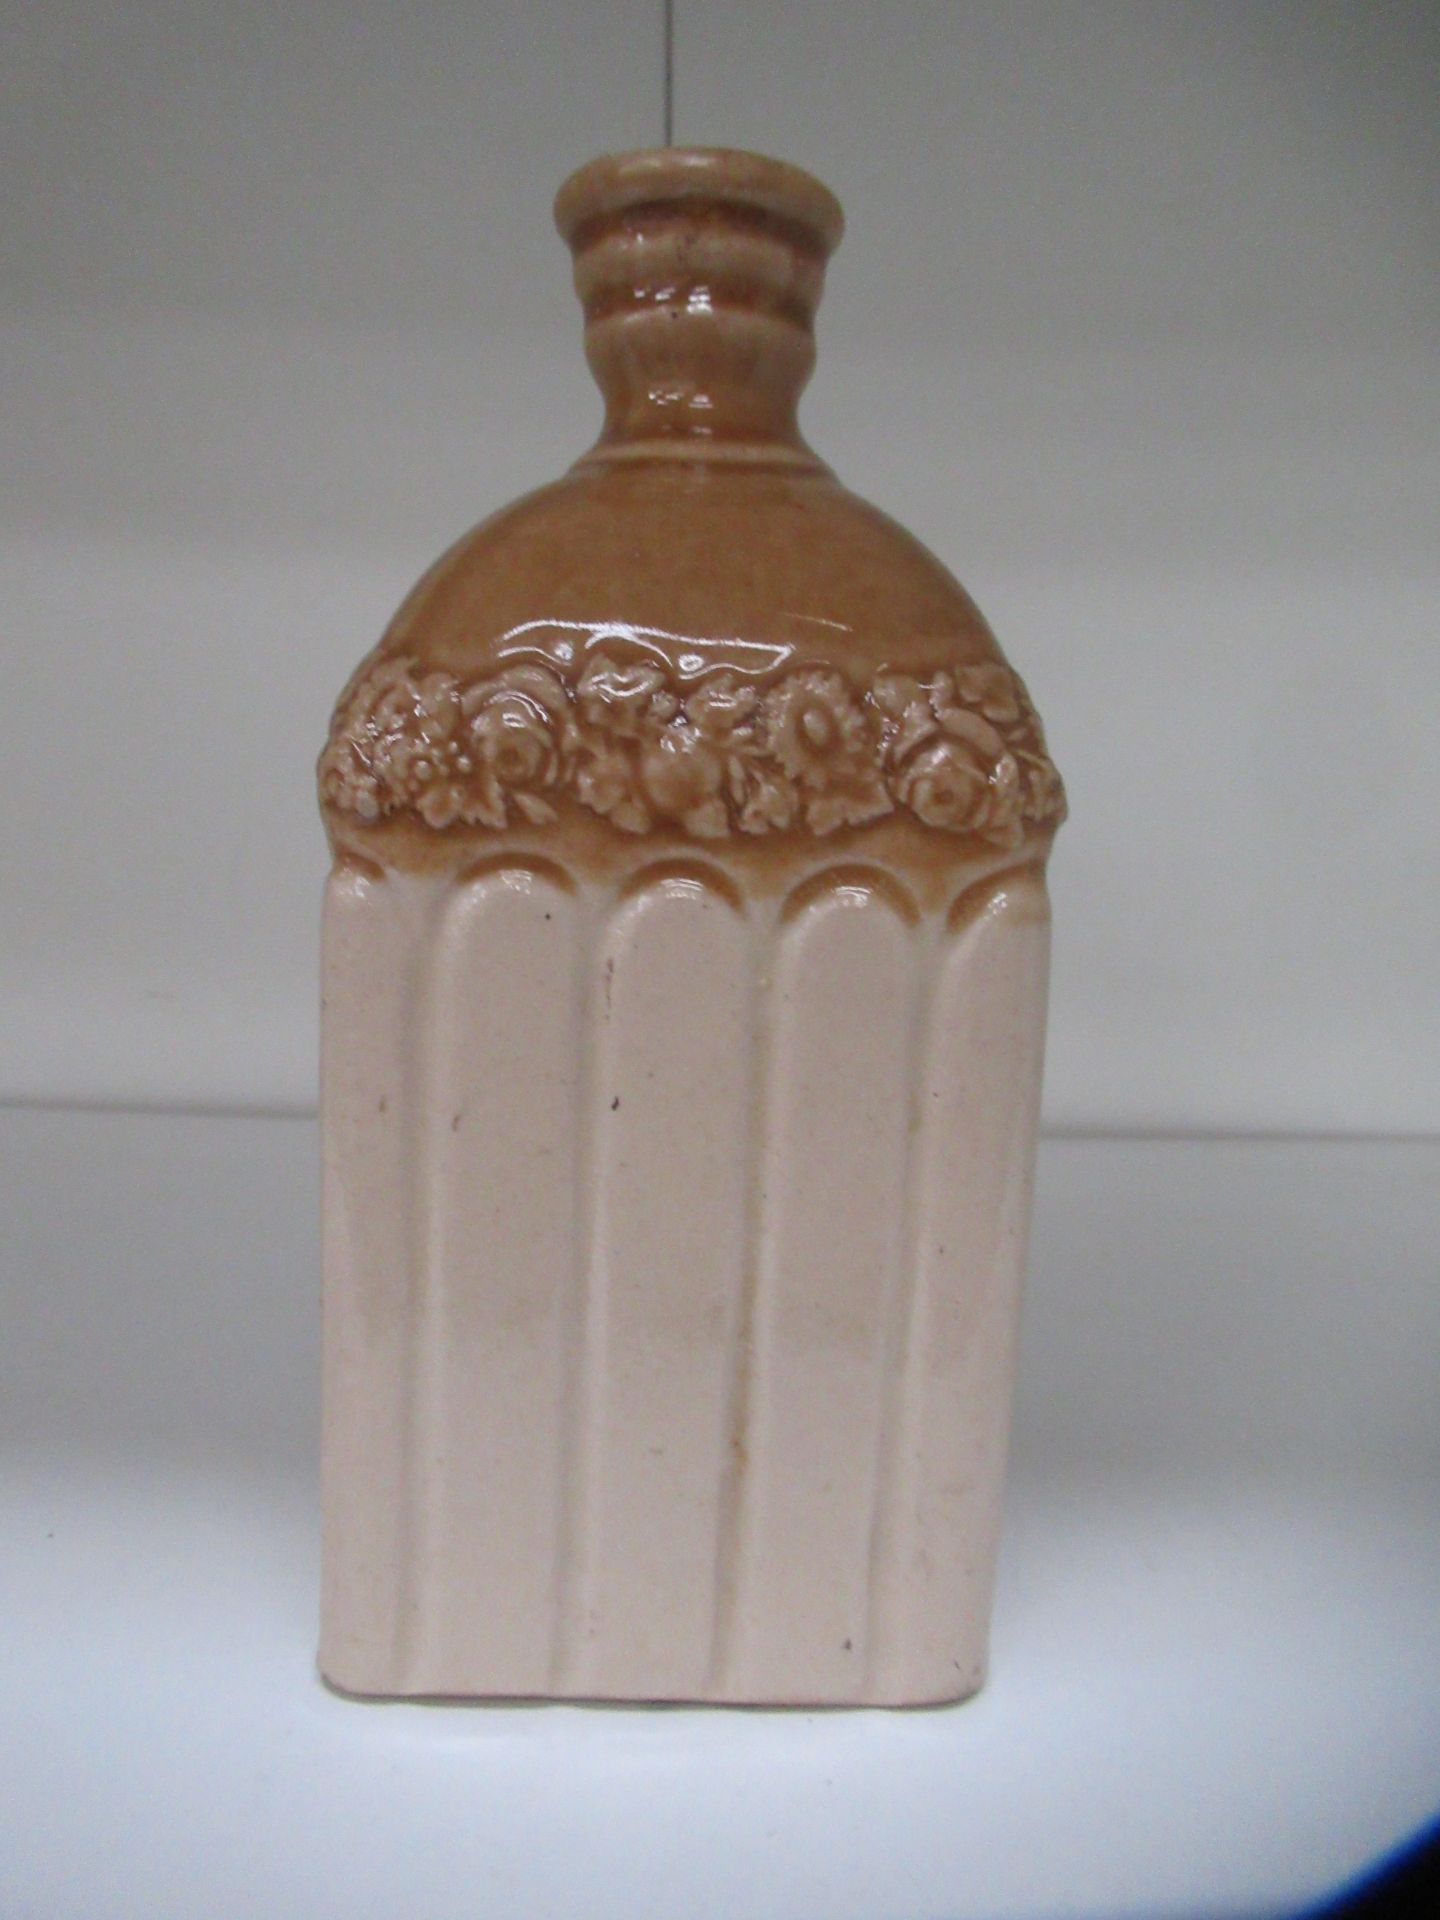 Stone bottle with floral detailing below bottle neck and 'G' stamp on handle - Image 2 of 8